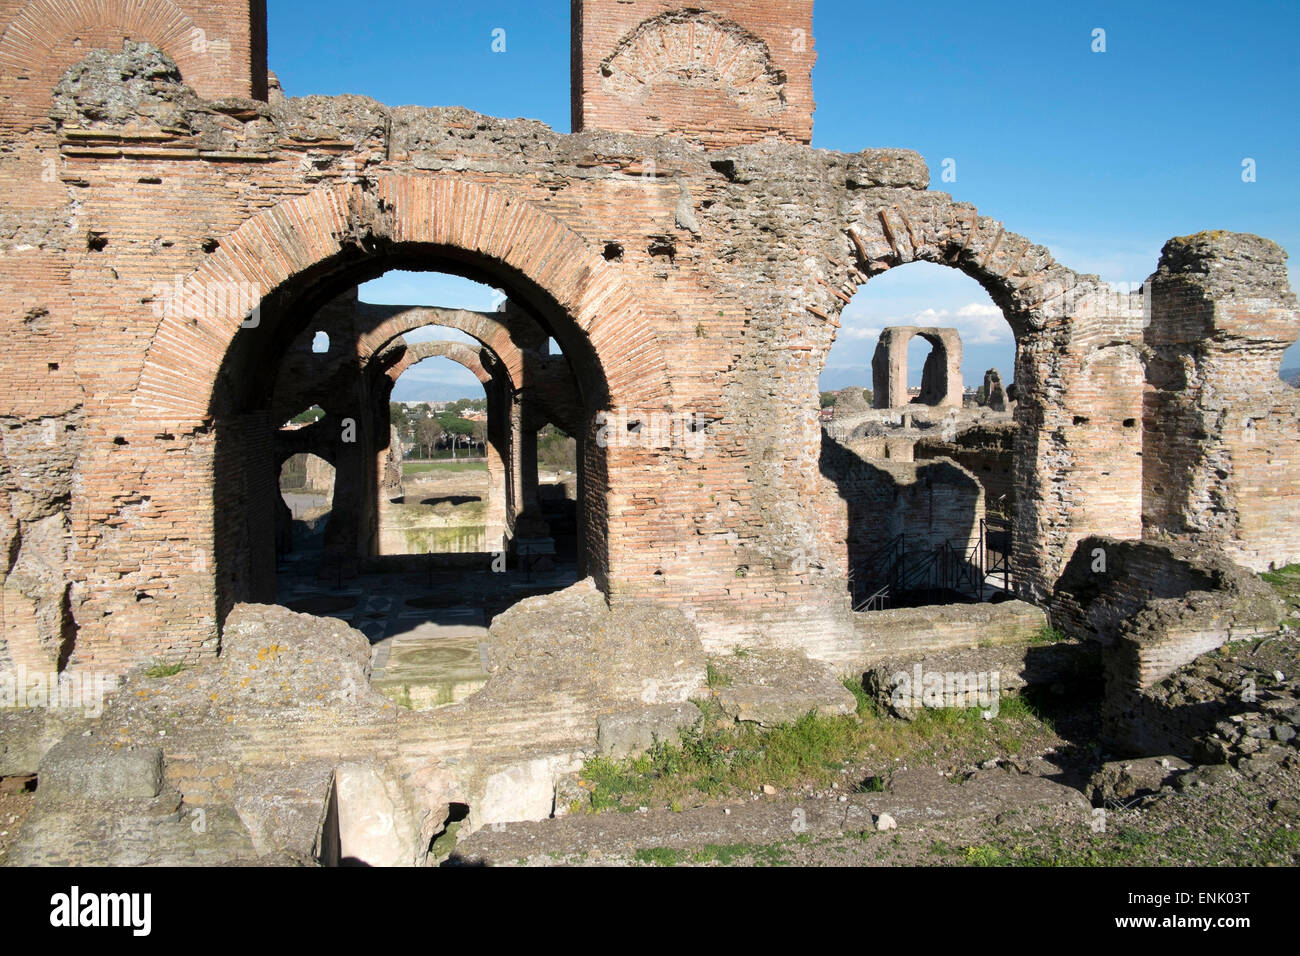 The Quintili brothers, Roman Consuls, built this magnificent villa in the year 151 BC on the Appian Way, Rome, Lazio, Italy Stock Photo